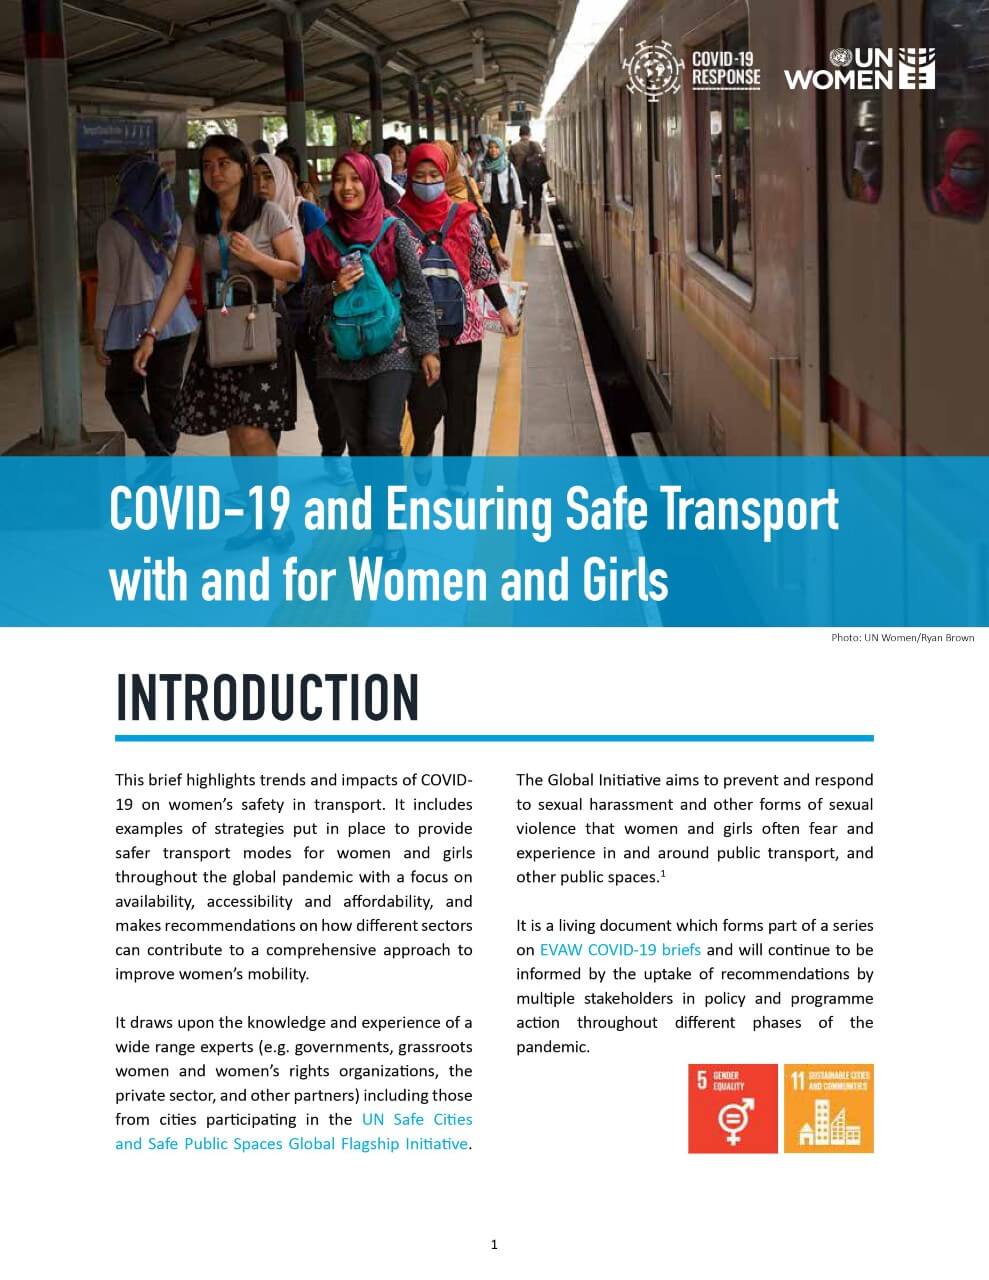 COVID-19 and ensuring safe transport with and for women and girls